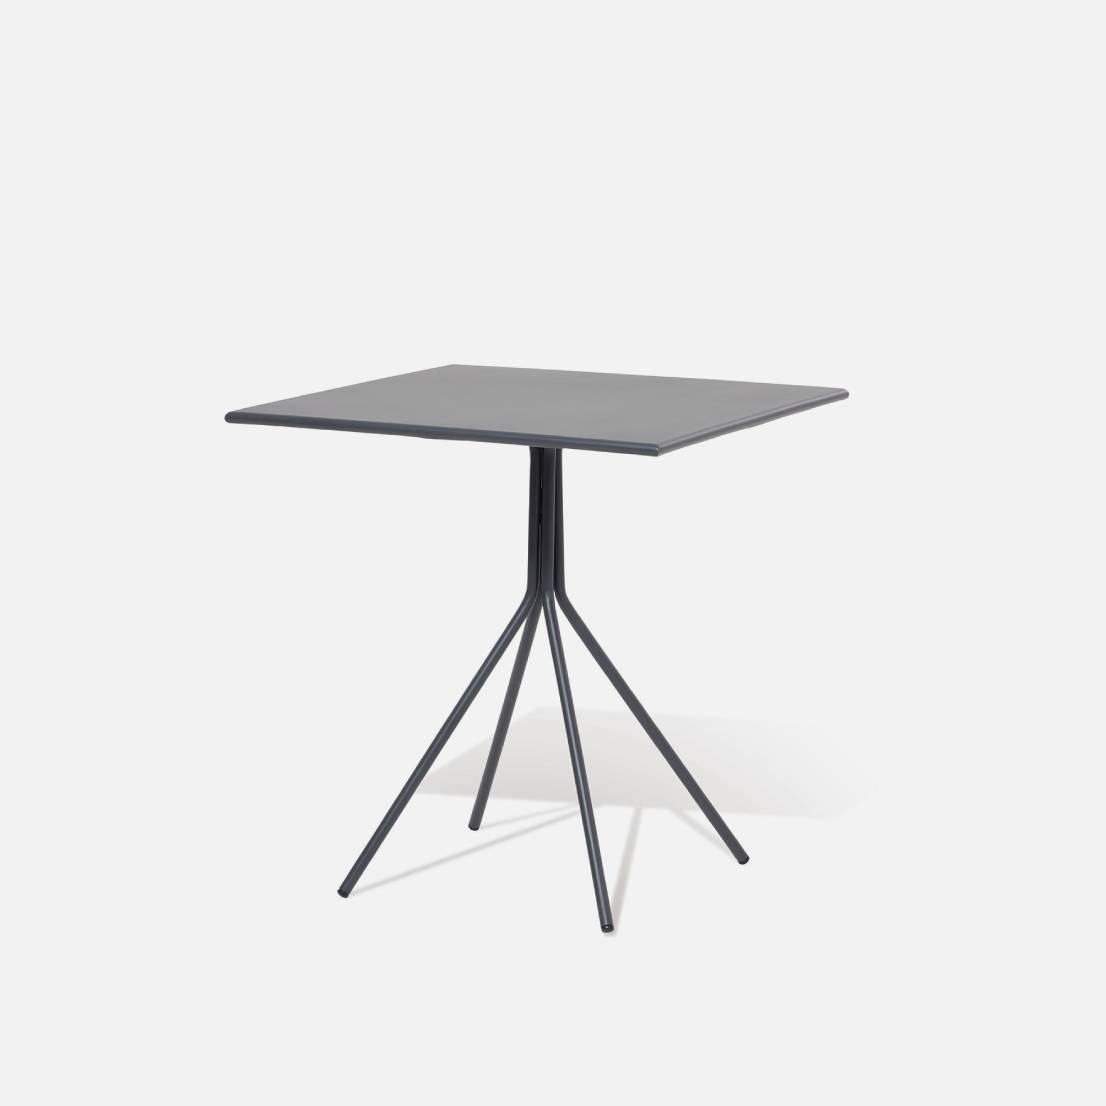 PALMA spider square dining table